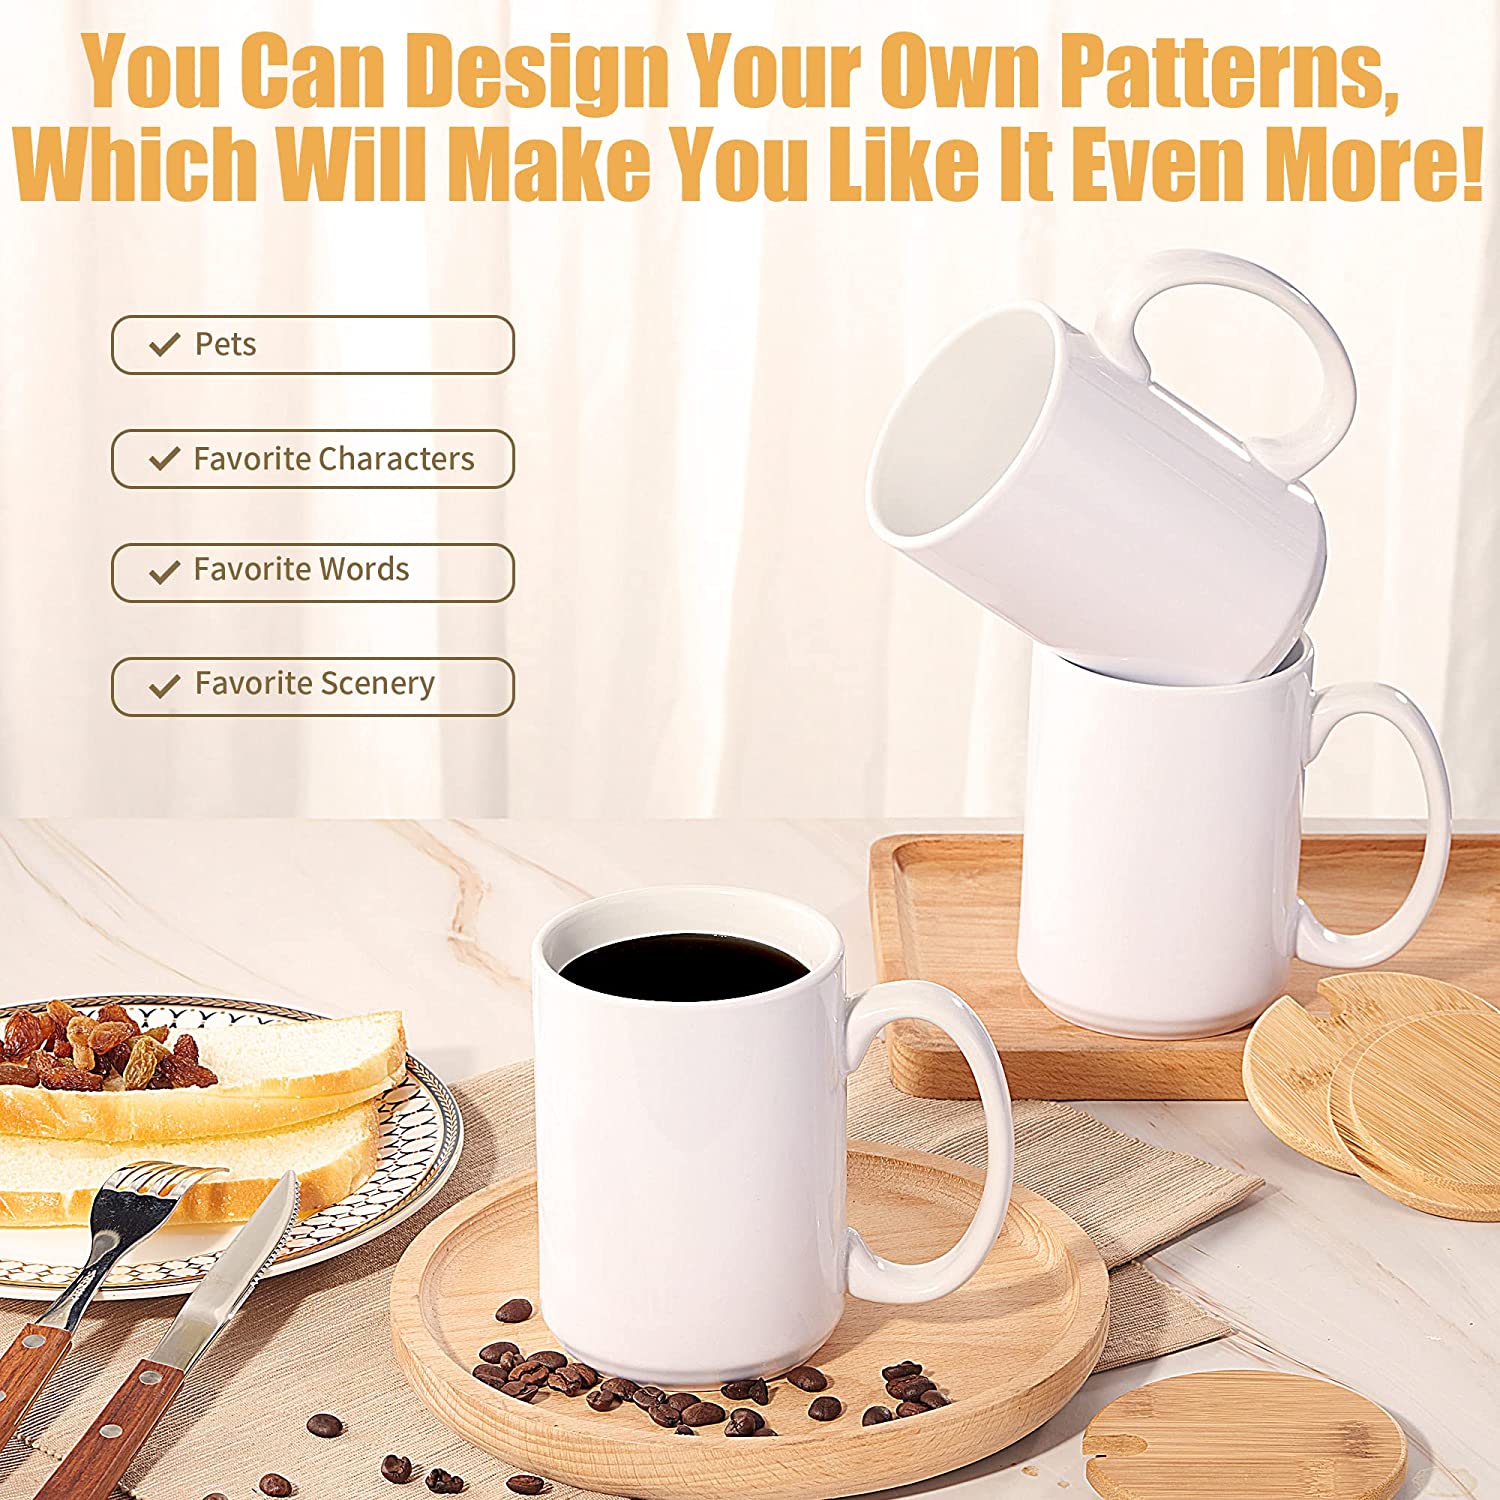 11oz Sublimation Mugs Sublimation Blank Cups Ceramic White Coffee  Mugs,Blank Coated Cup, Blank White Mug,Sublimation Blanks Mugs,Milk, Hot  Cocoa,Tea